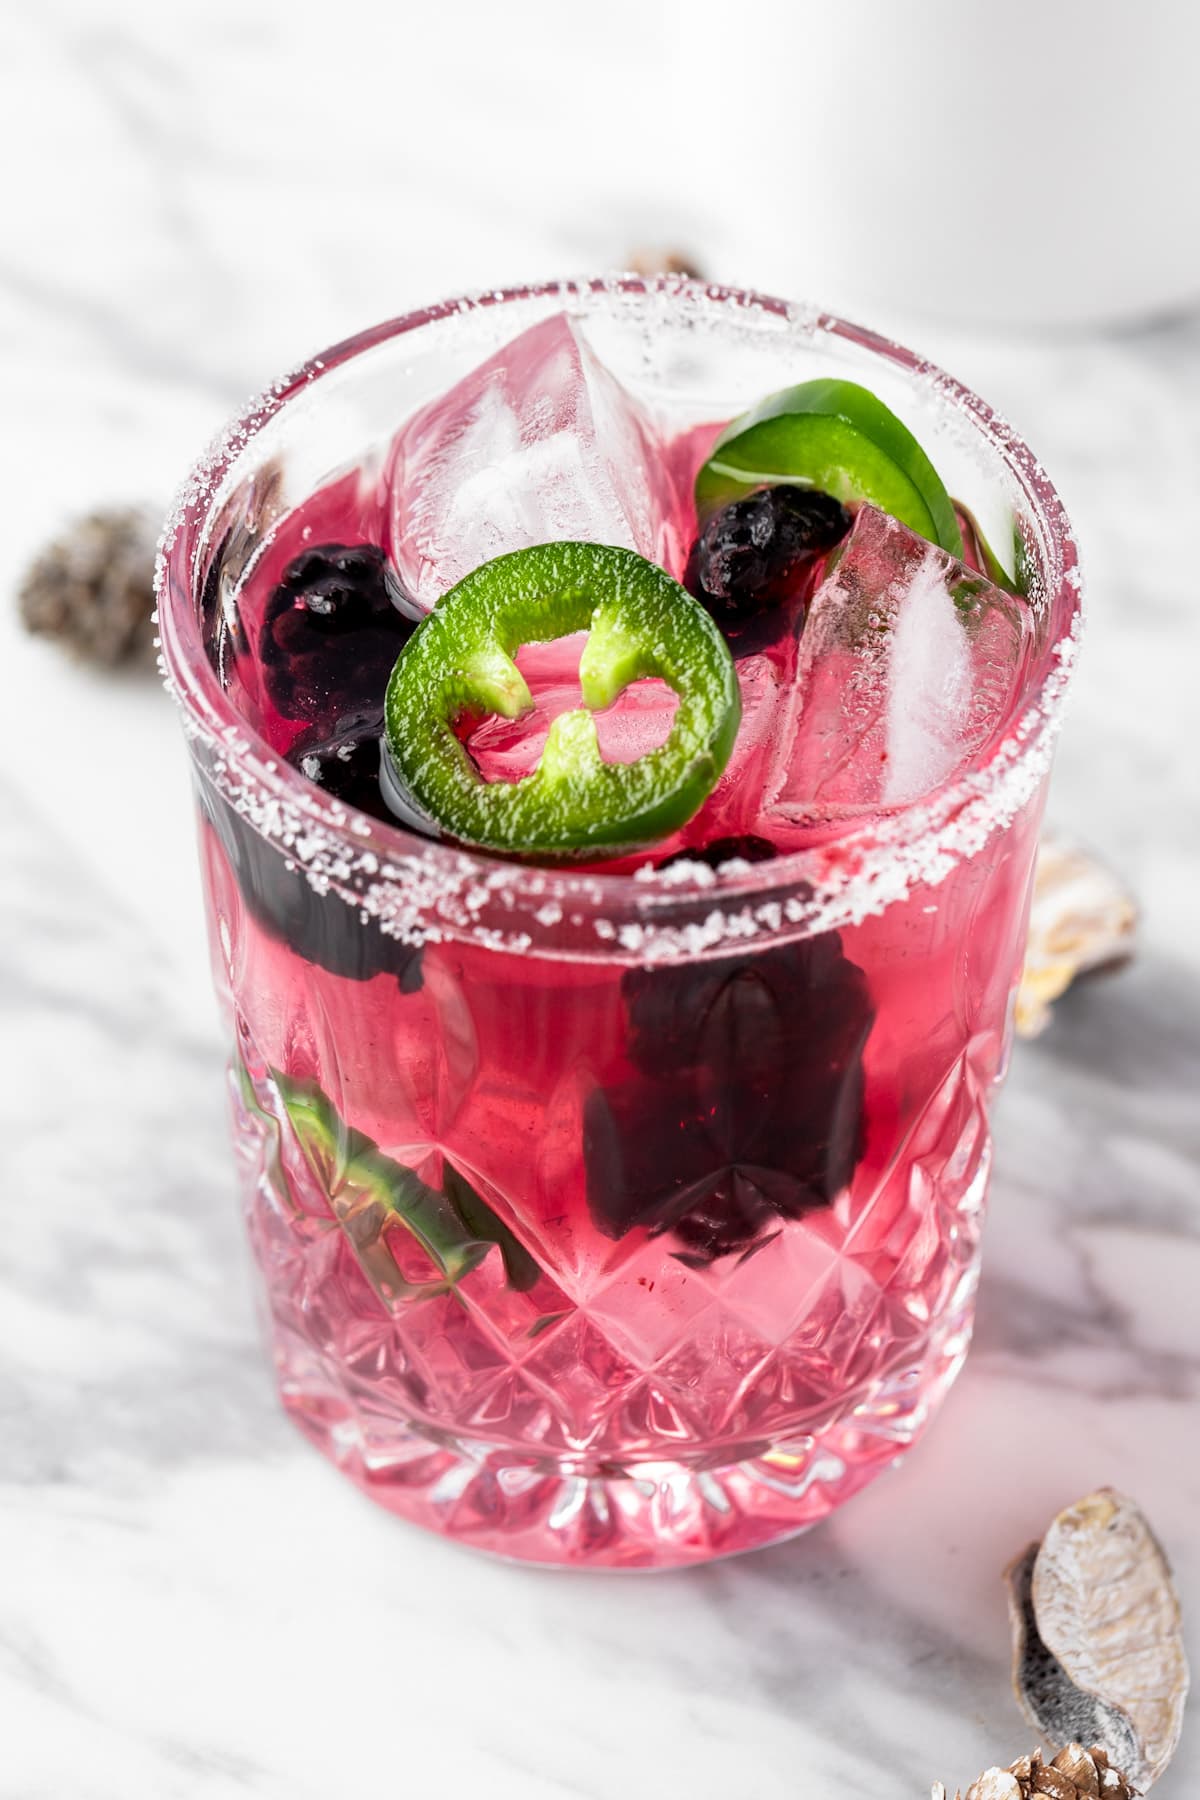 A spicy blackberry margarita garnished with jalapenos and blackberries.